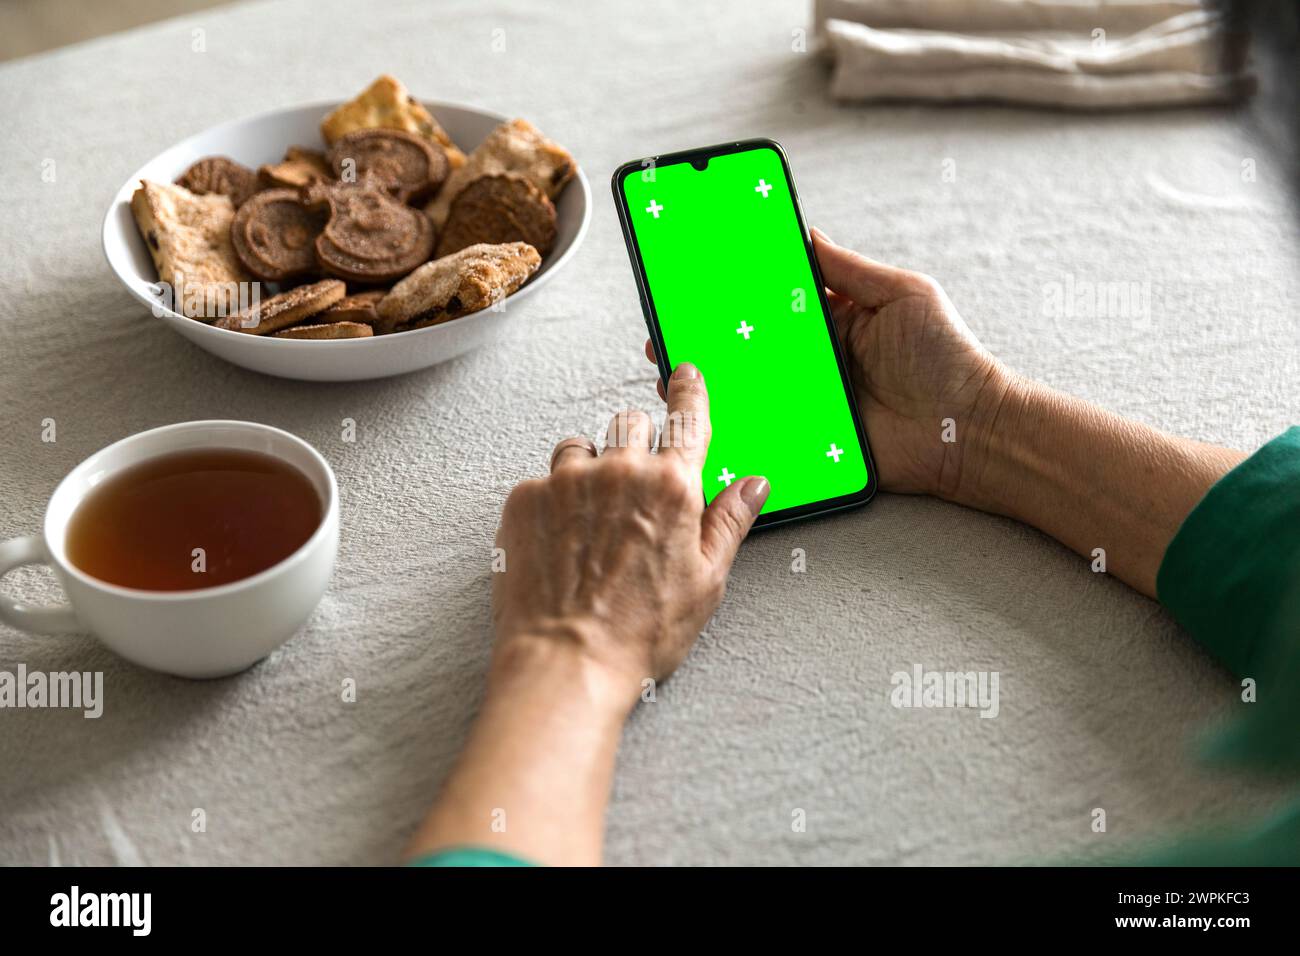 mobile phone with green screen chromakey display in elderly woman hand Stock Photo